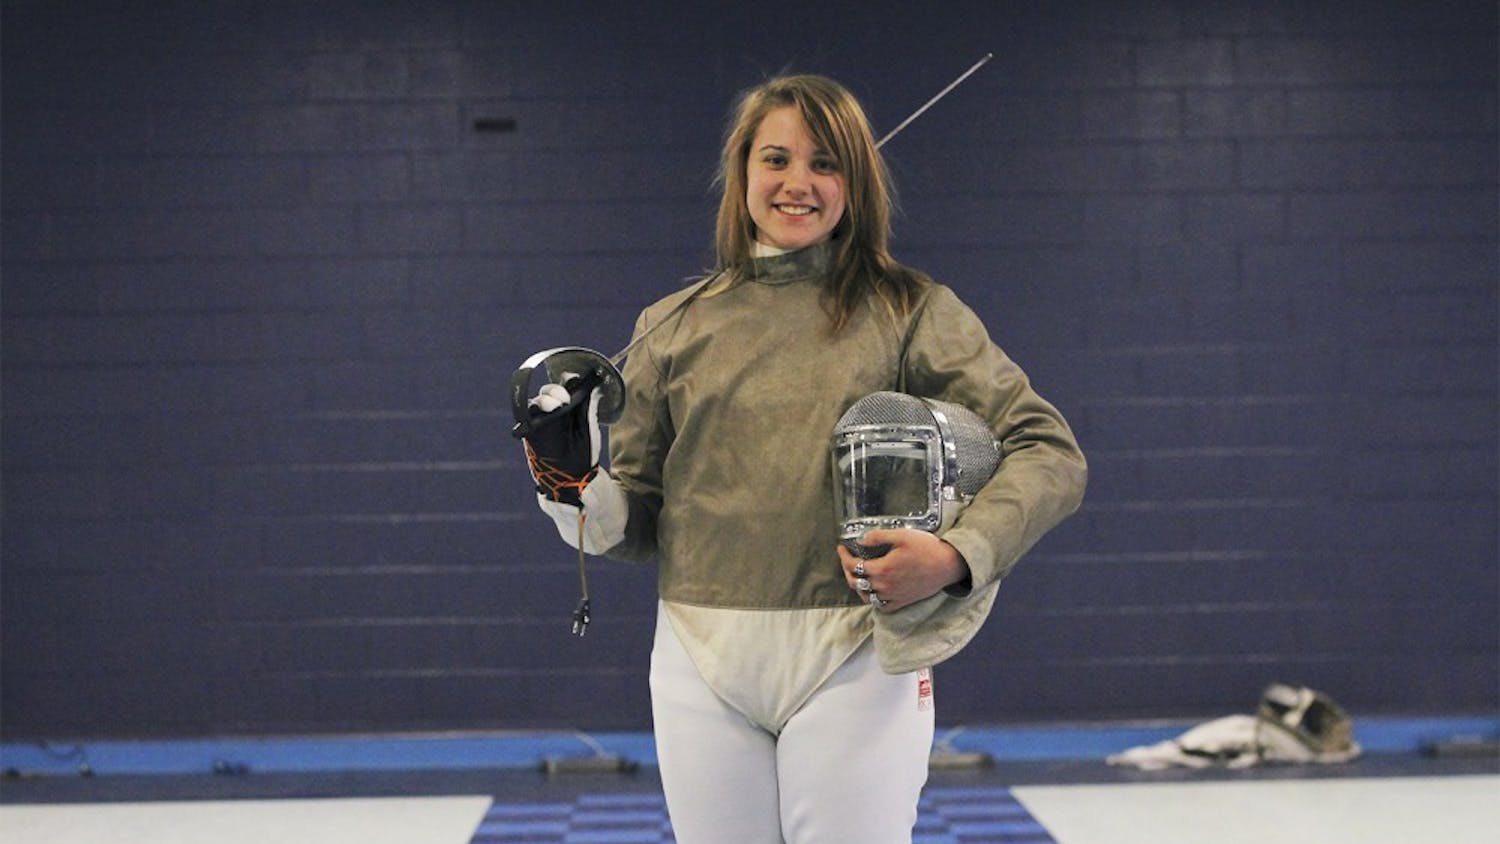 Gillian Litynski, a sophomore from New York, is one of four Tar Heels who qualified for the 2013 NCAA Fencing Championship. Litynski will compete in women's saber in San Antonio, Texas this weekend. This is her second appearance at the championship.